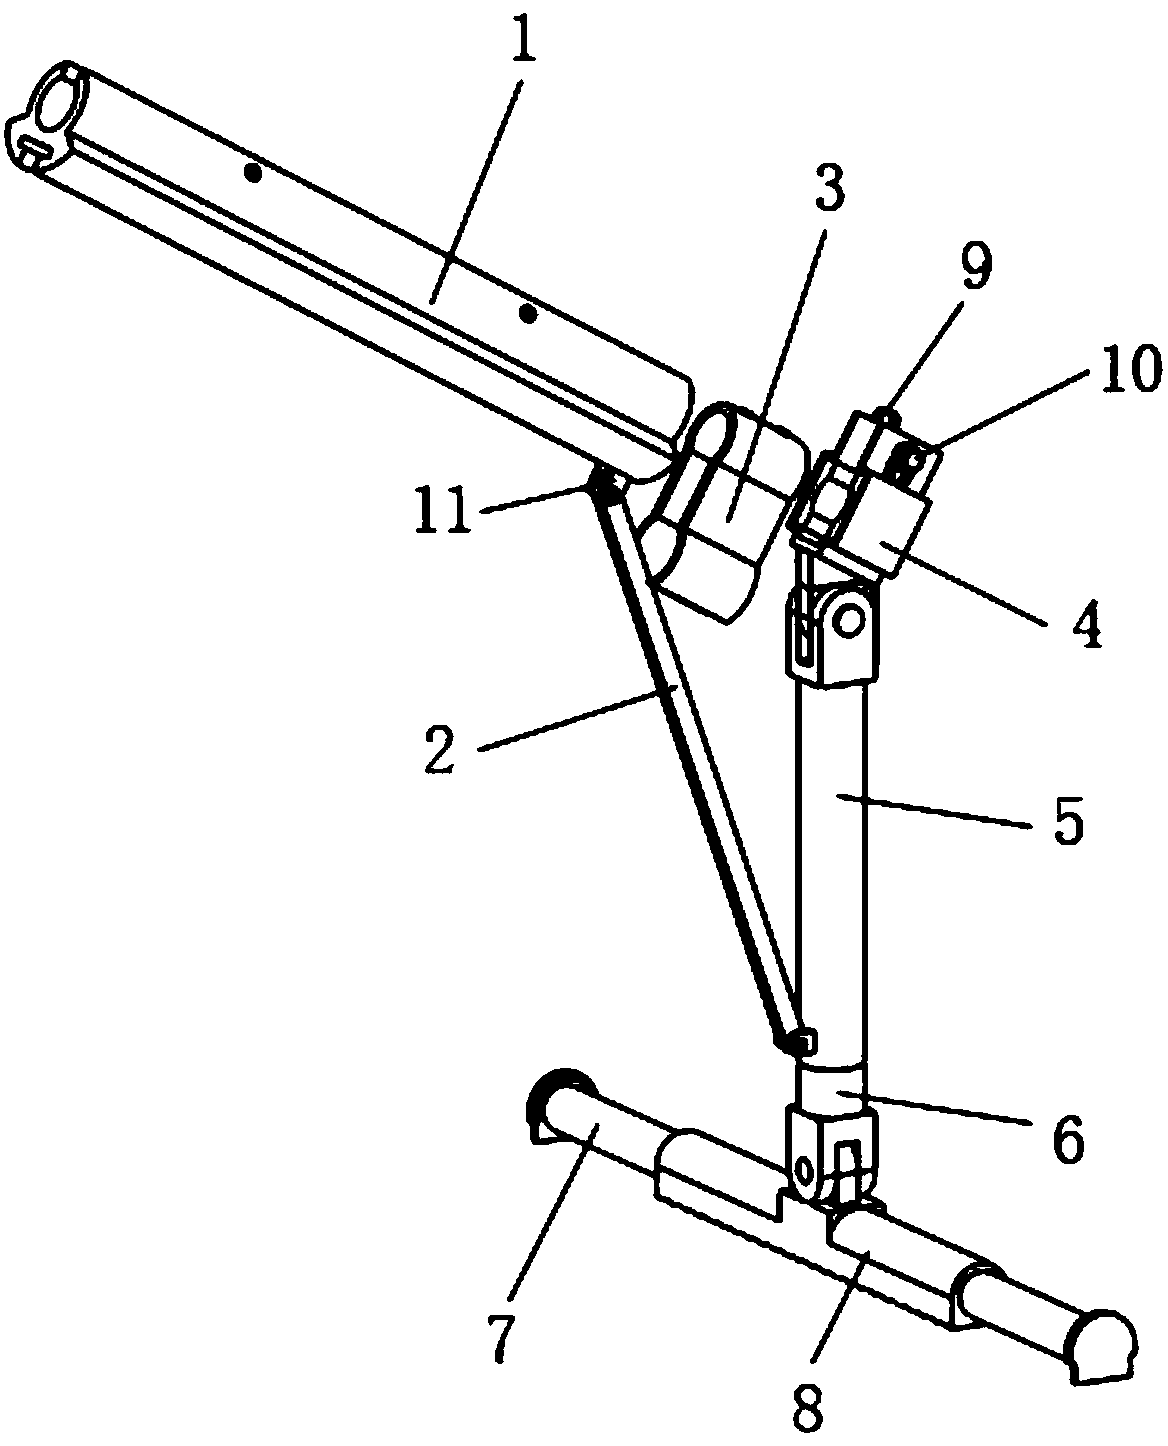 Novel bicycle supporting device